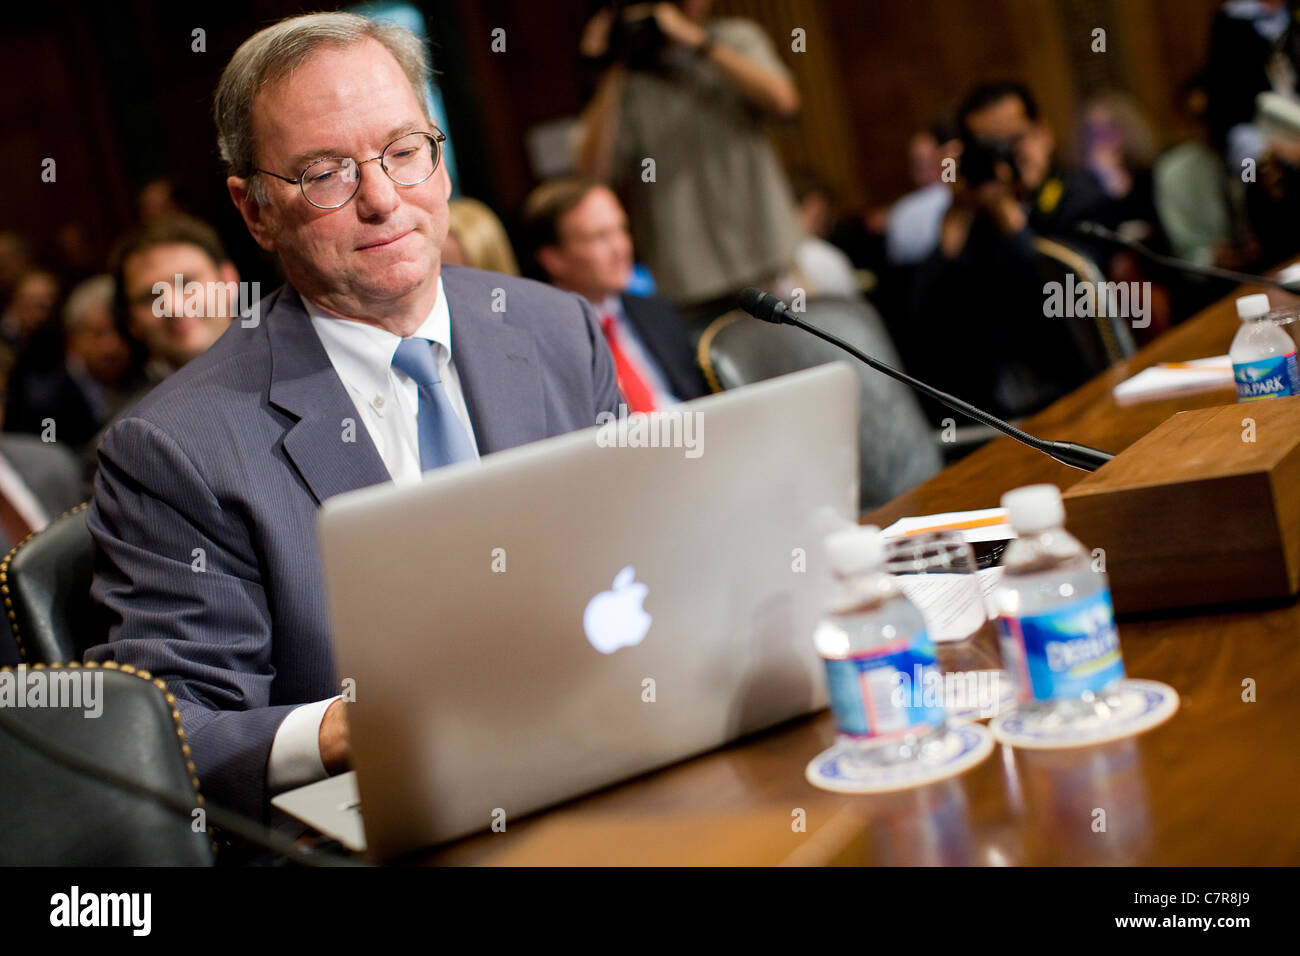 Former Google CEO and current Executive Chairman Eric Schmidt. Stock Photo